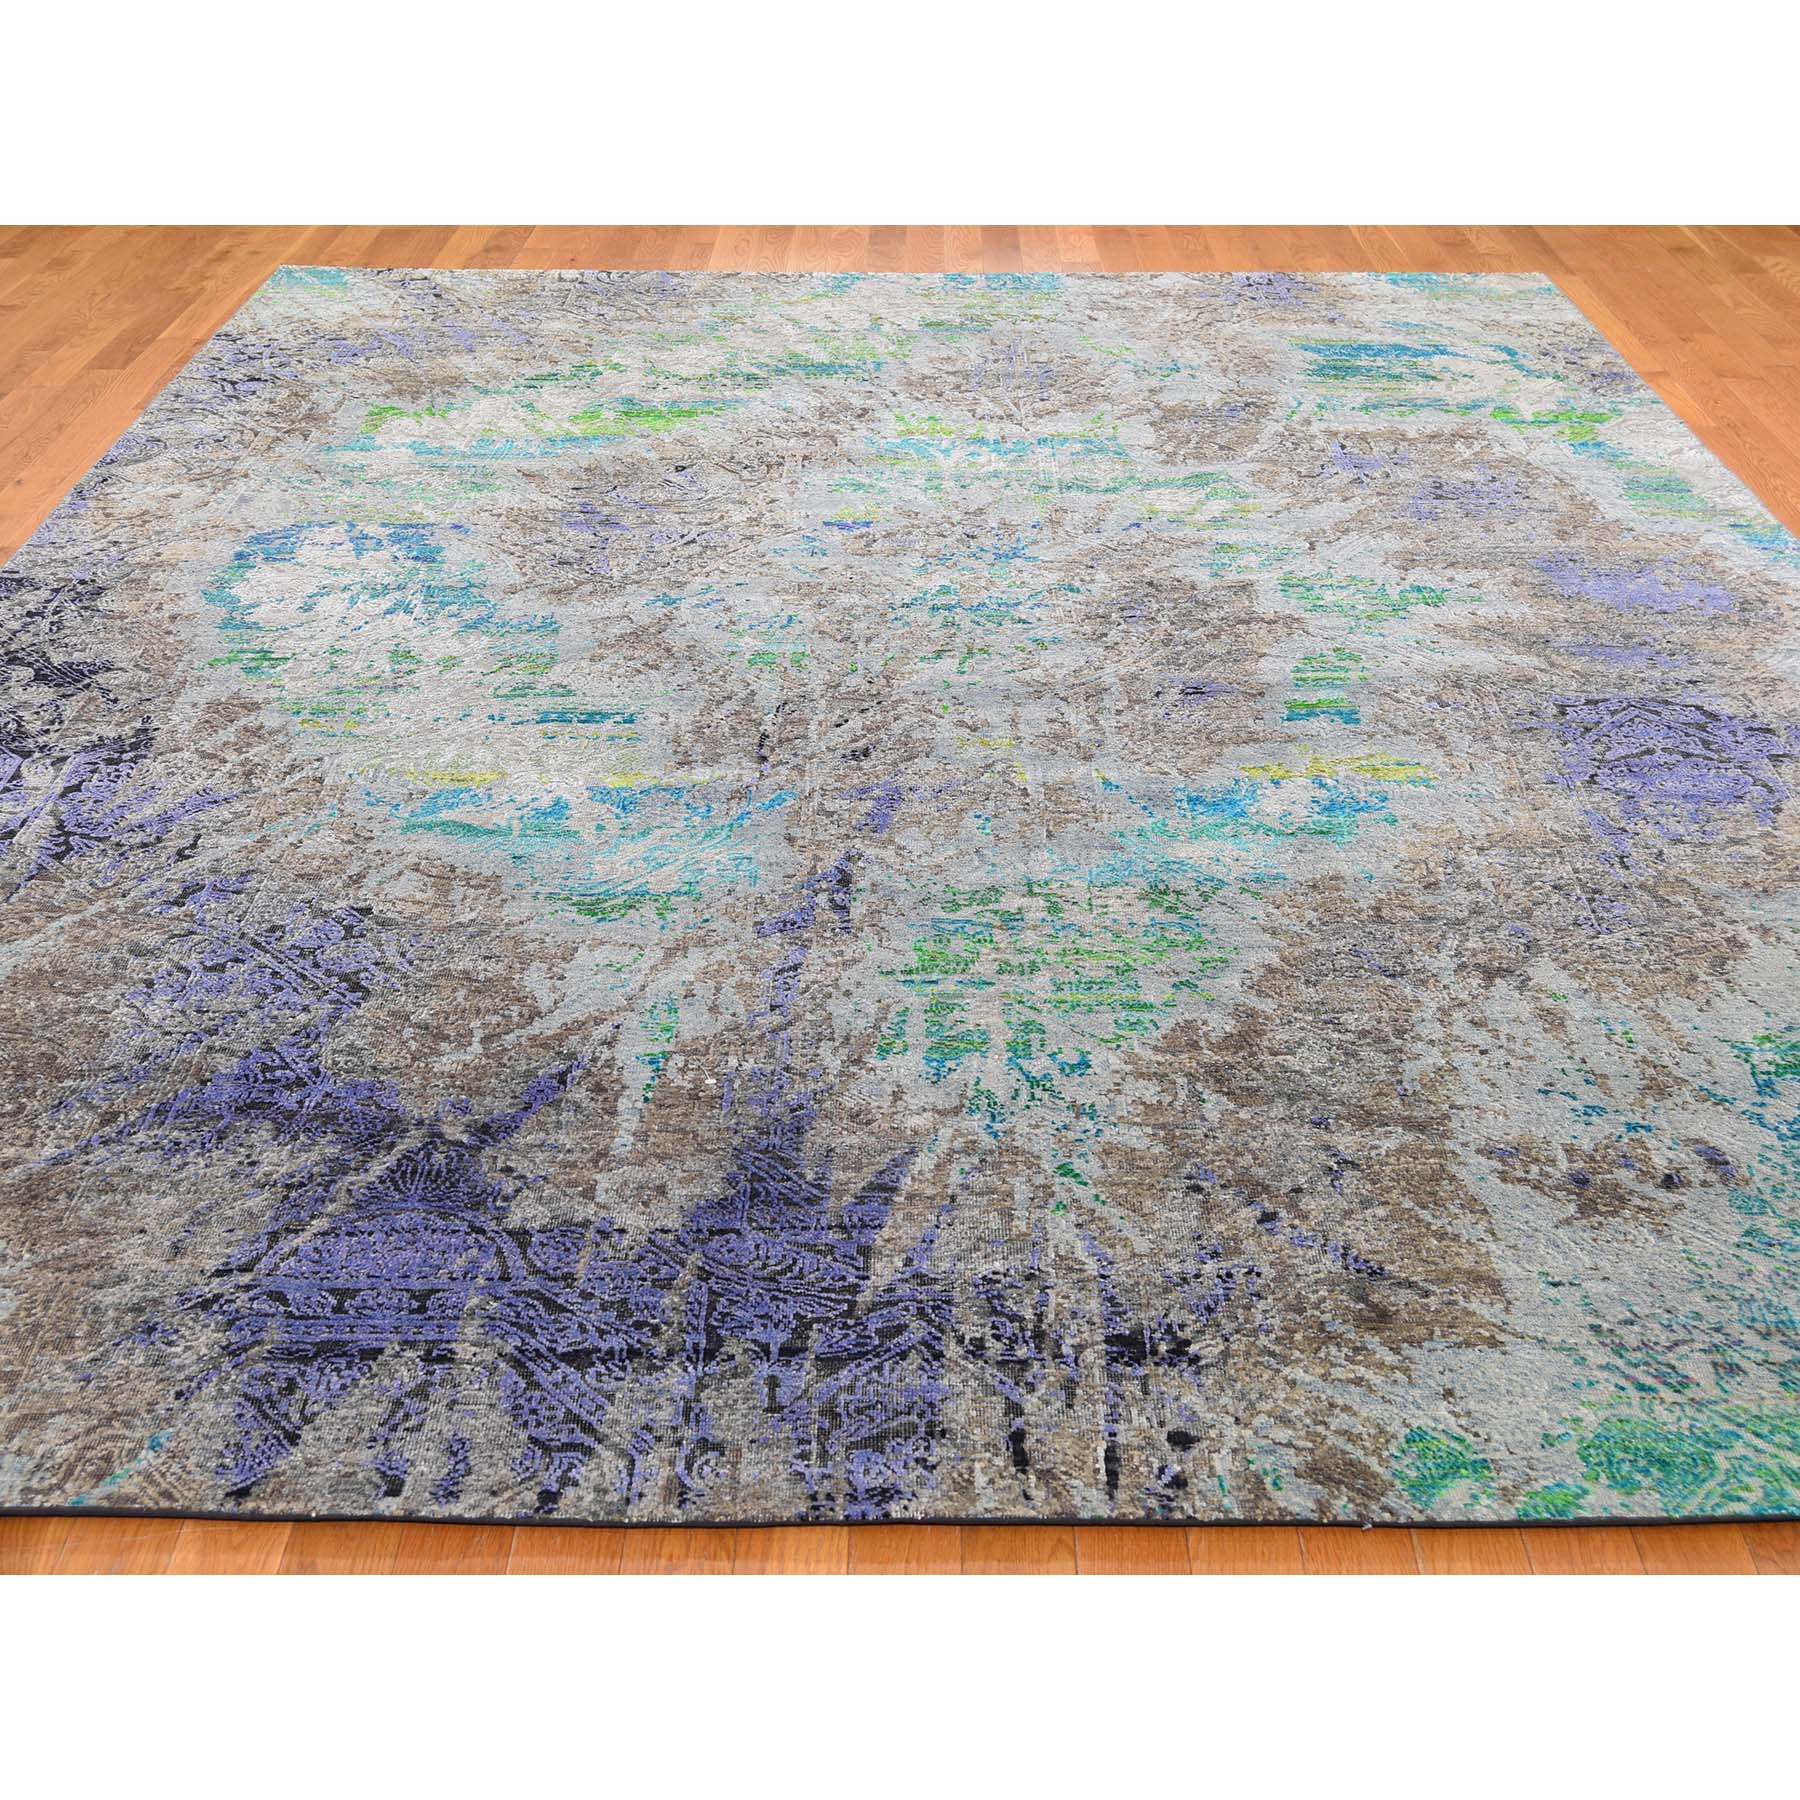 8-9 x11-10  COLORFUL DIMINISHING COINS, Sari Silk With Textured Wool Hand-Knotted Rug 